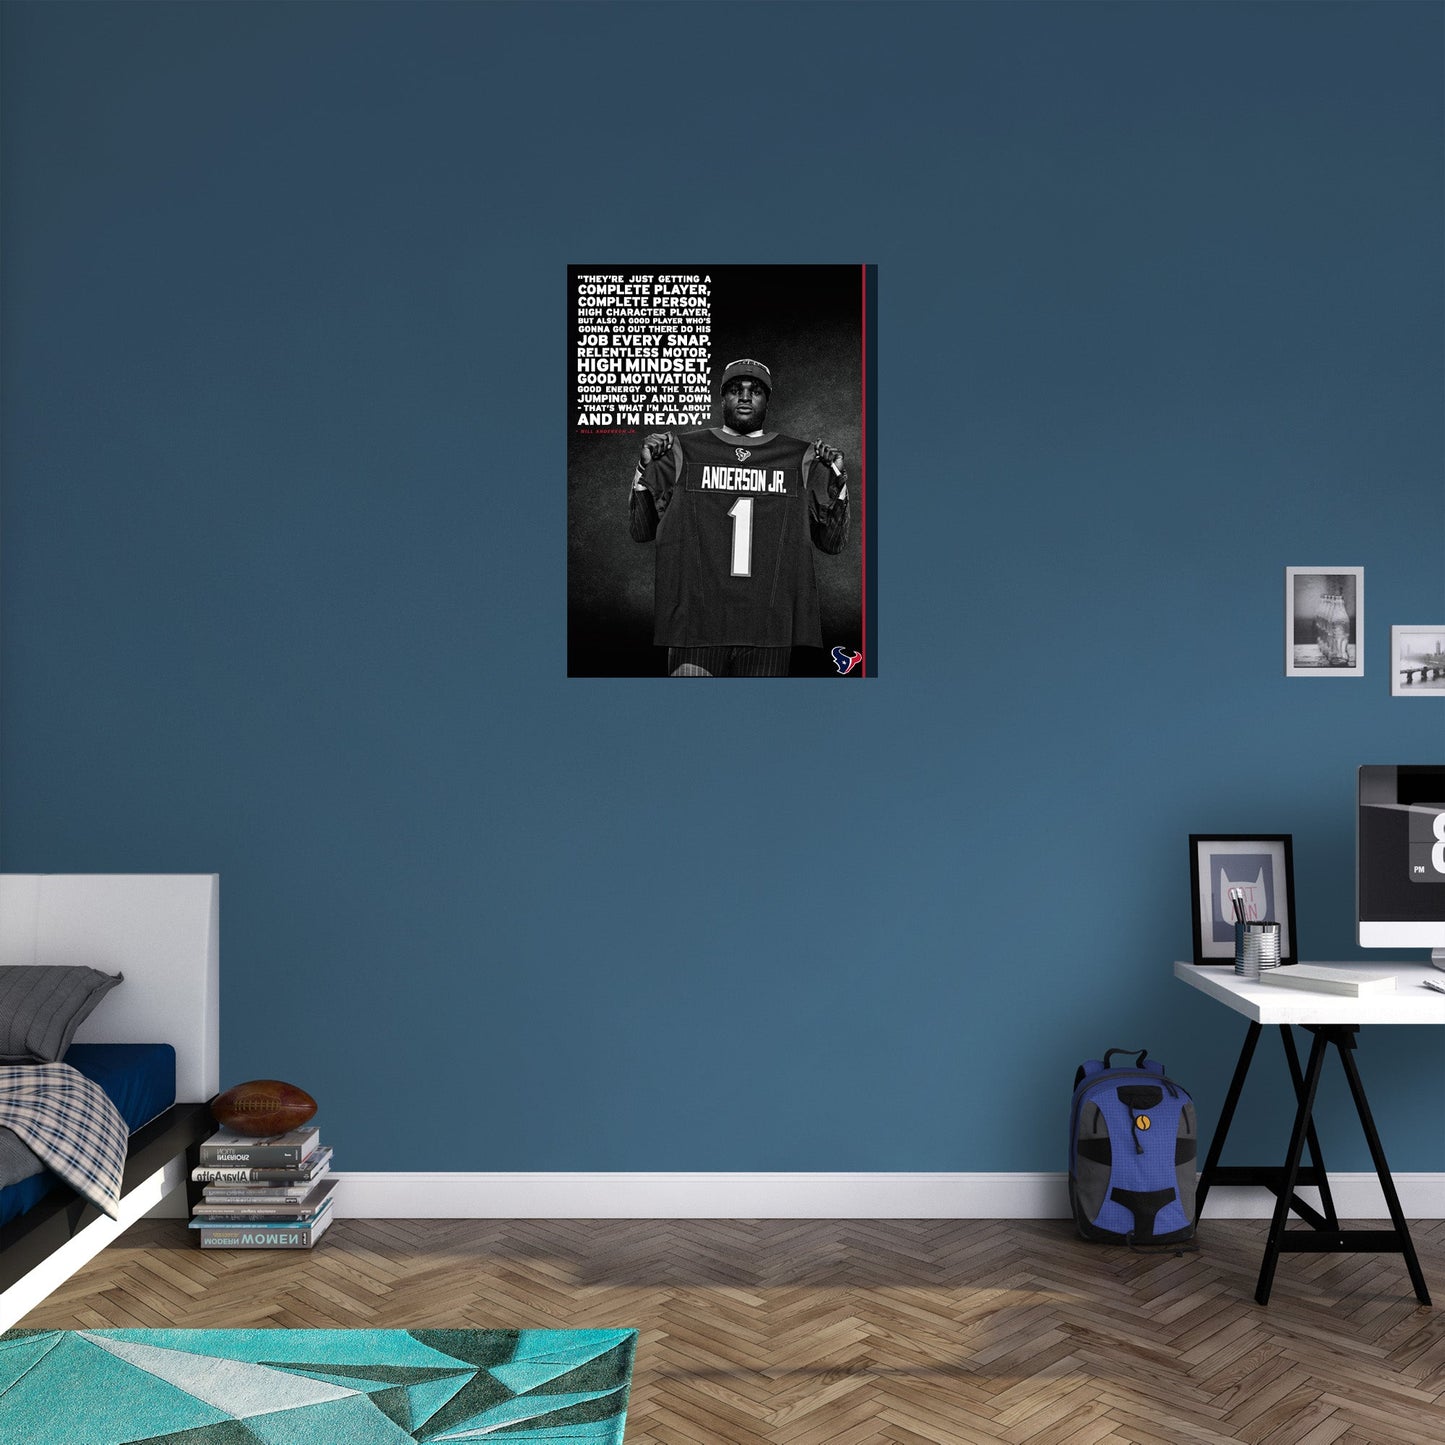 Houston Texans: Will Anderson Jr.  Draft Night Inspirational Poster        - Officially Licensed NFL Removable     Adhesive Decal